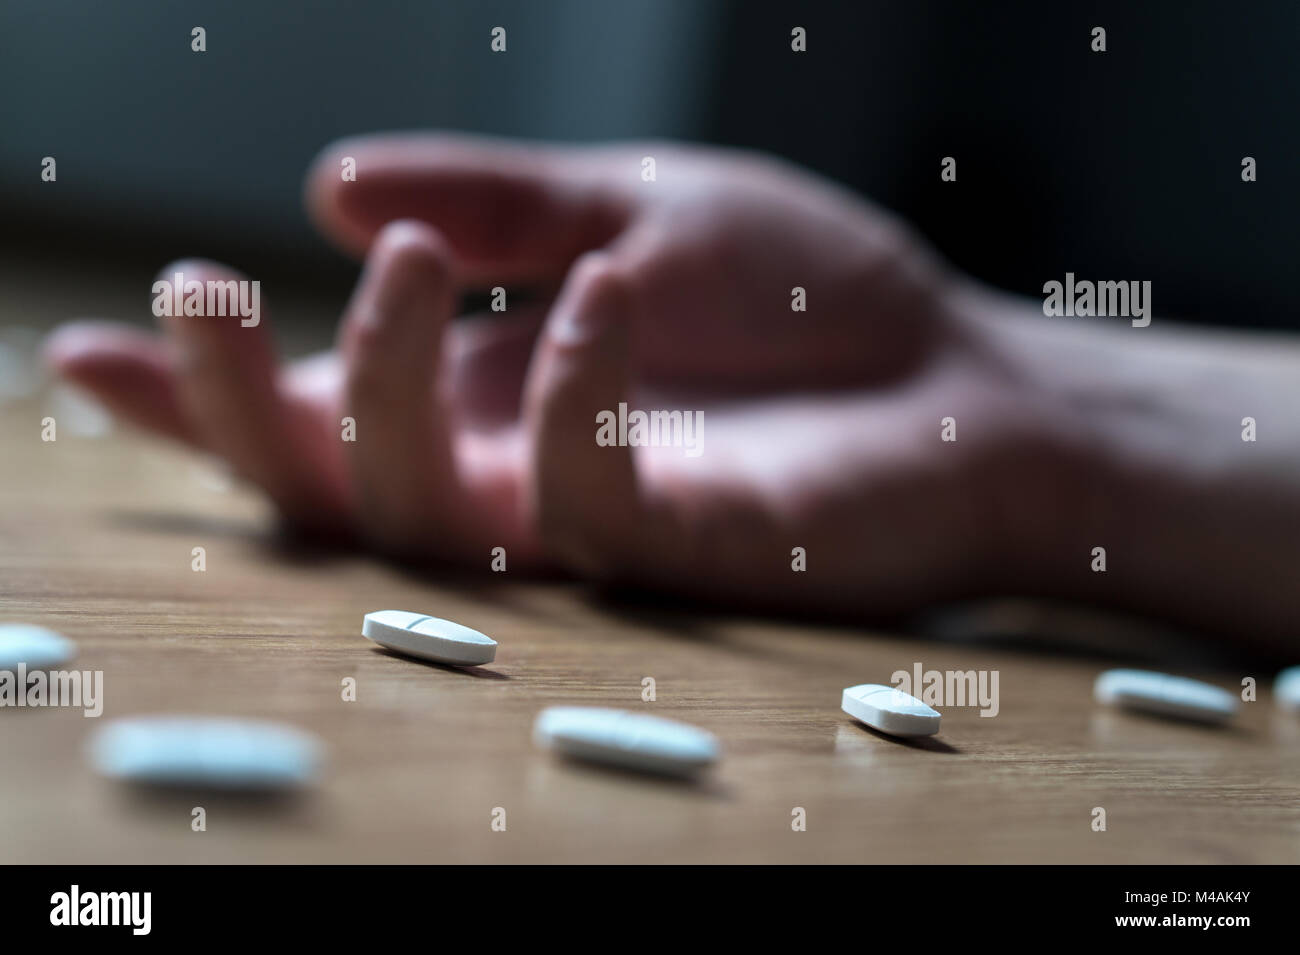 Drug addiction, medical abuse and narcotics hook and dependence concept. Drug addict with withdrawal symptoms lying on floor. Tablet overdose. Suicide Stock Photo